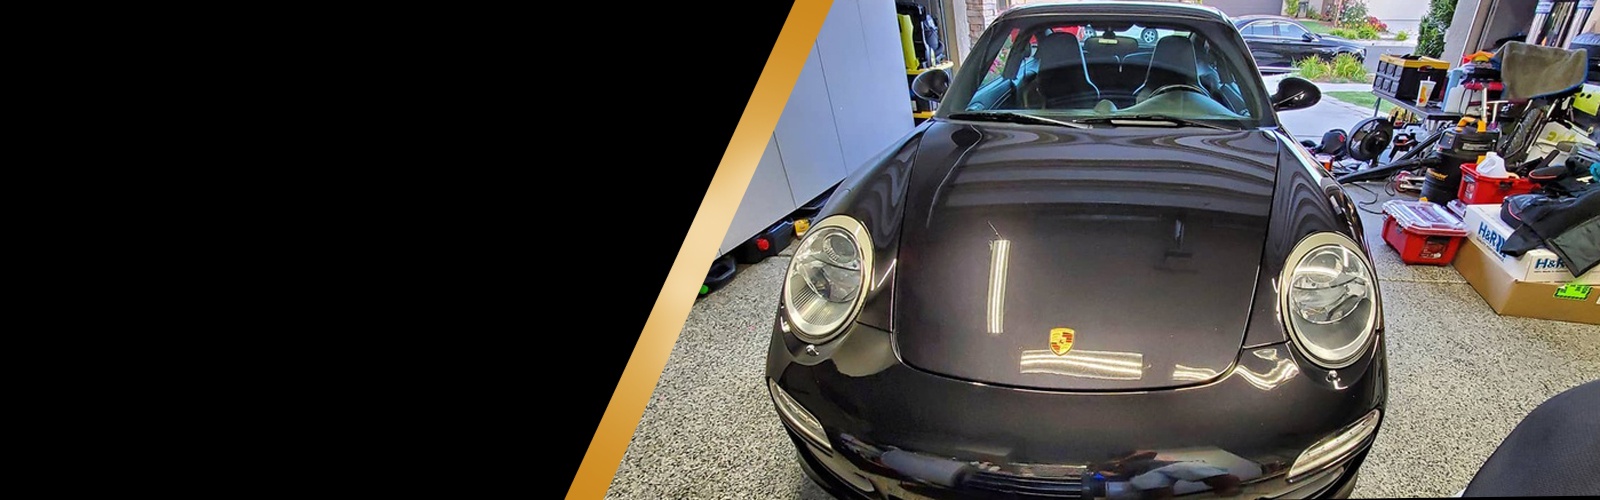 Invest in the long-term protection of your car with our professional ceramic coating application in Pomona